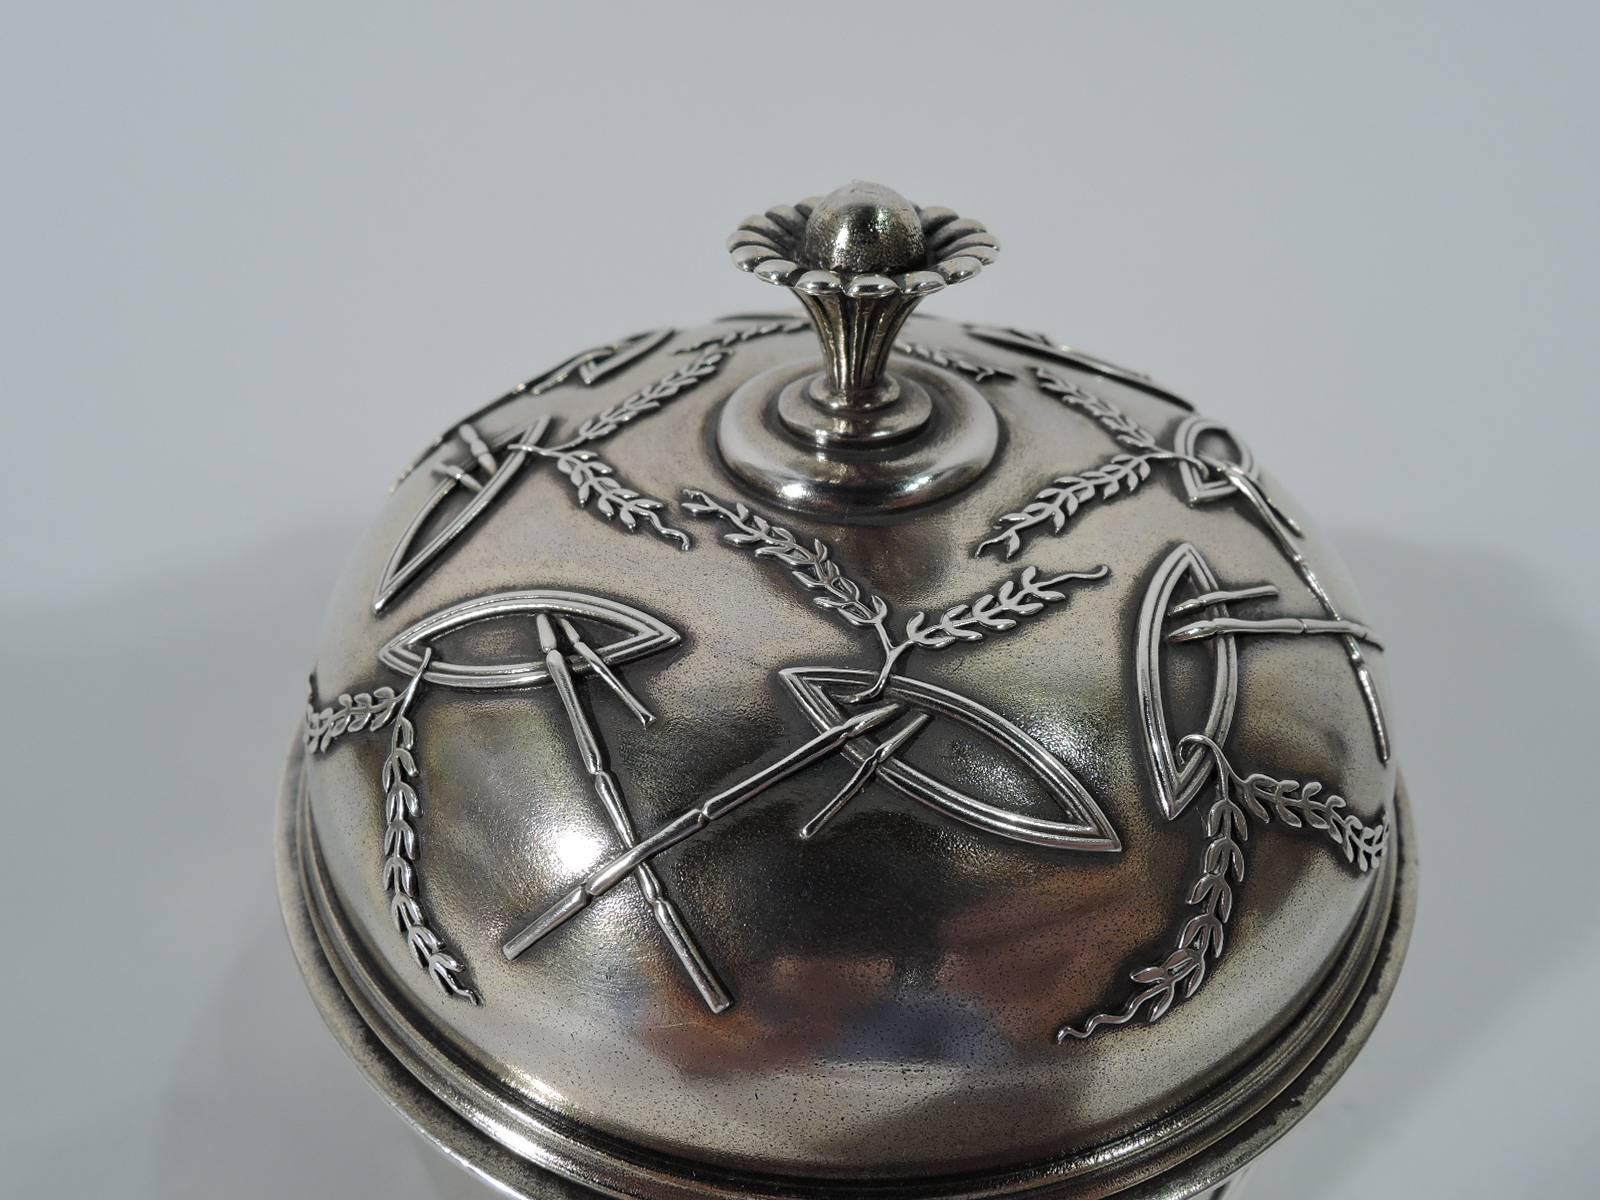 Late 19th Century Early Tiffany Aesthetic Japonesque Sterling Silver Tea Caddy